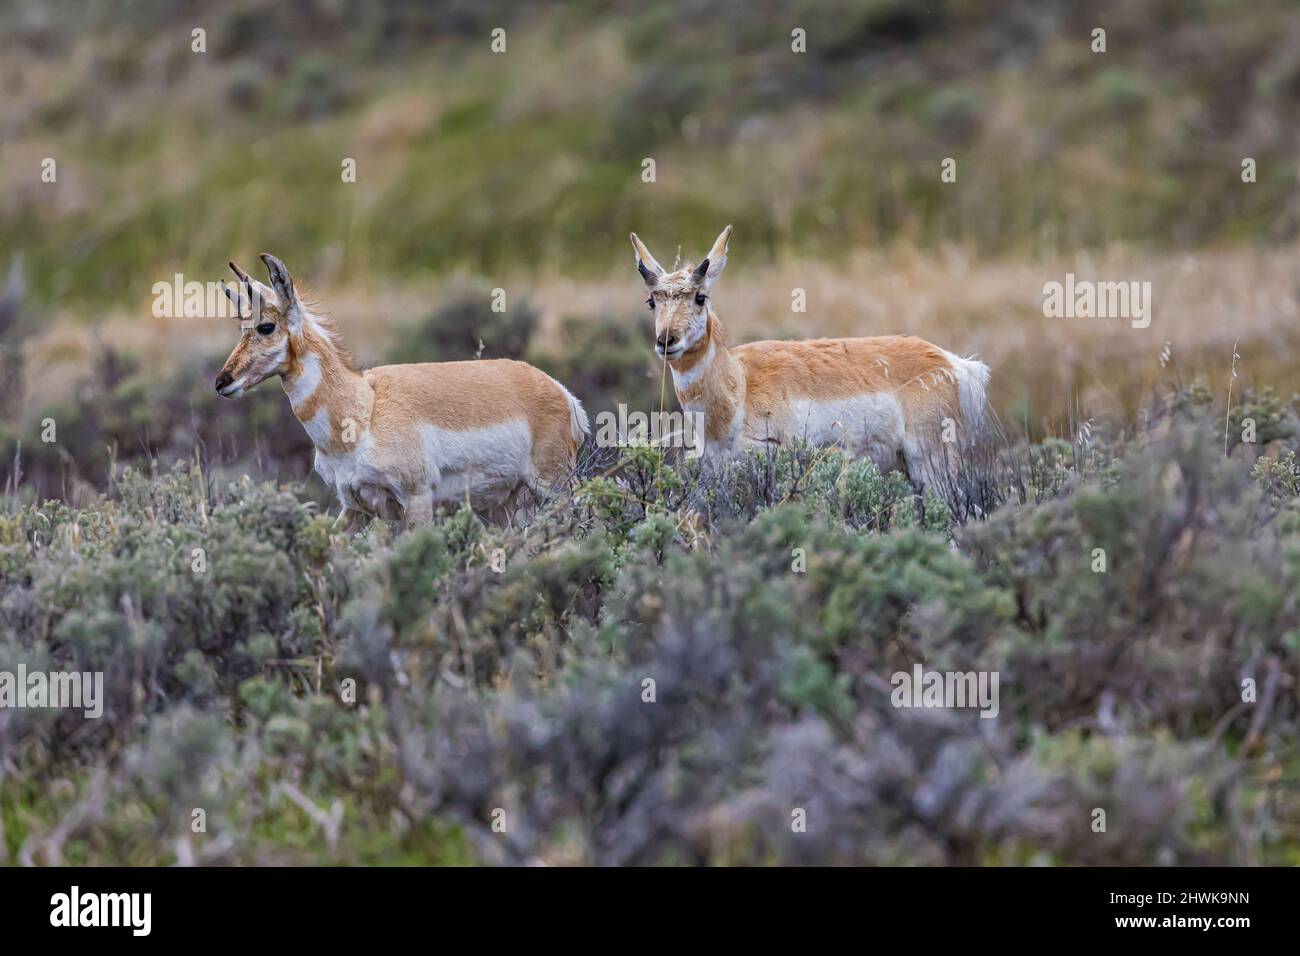 Pronghorn, Antilocapra americana, in the Lamar Valley of Yellowstone National Park, Wyoming, USA Stock Photo